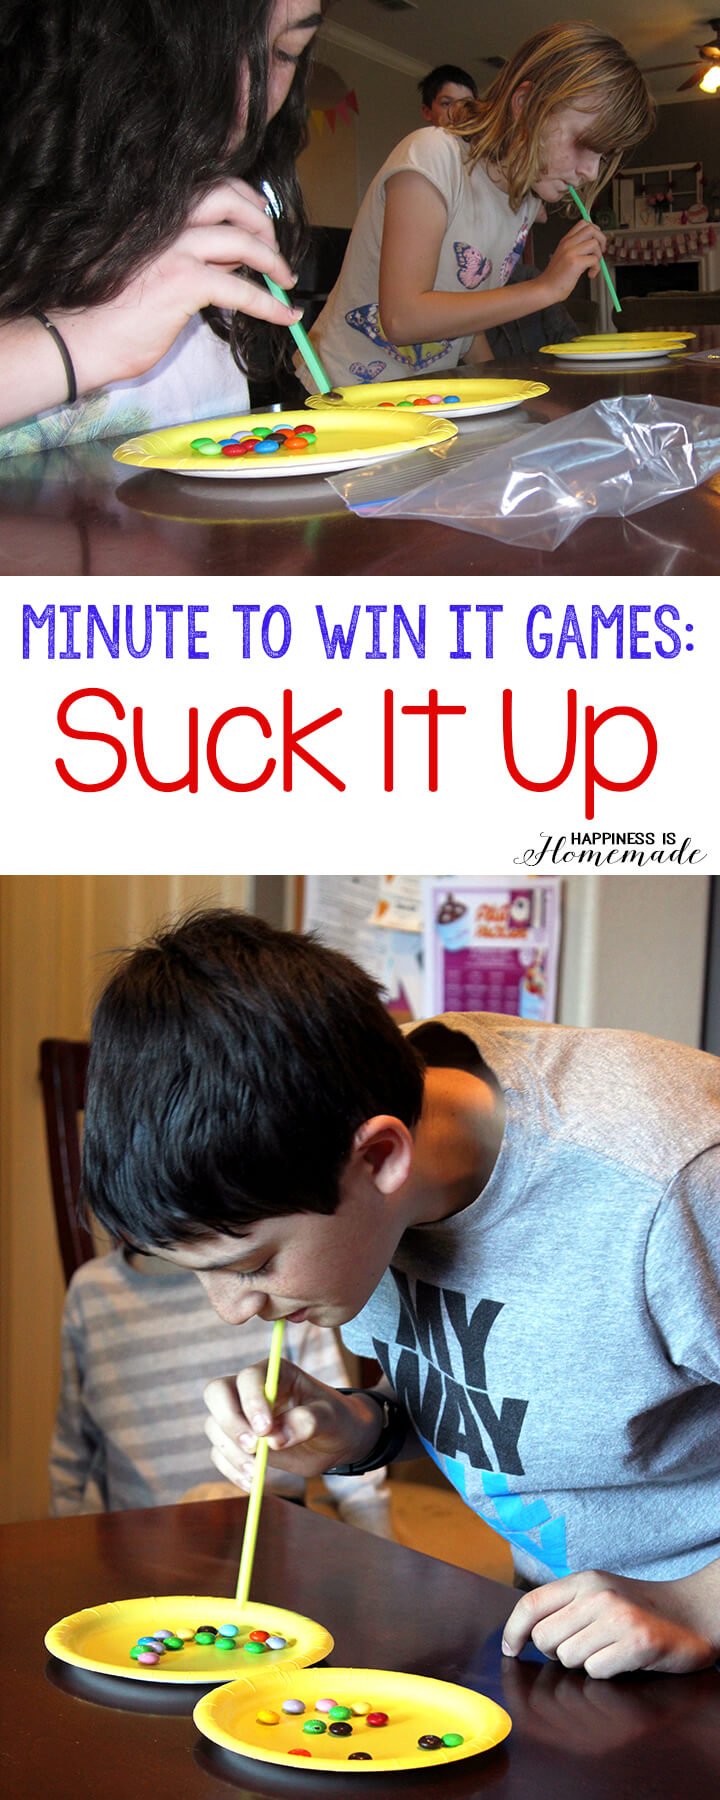 Over 13 Awesome Minute to Win It Party Games for Kids, Teens and Family to Play - Perfect for school, Christmas, New Years, Summer and all year! www.kidfriendlythingstodo.com